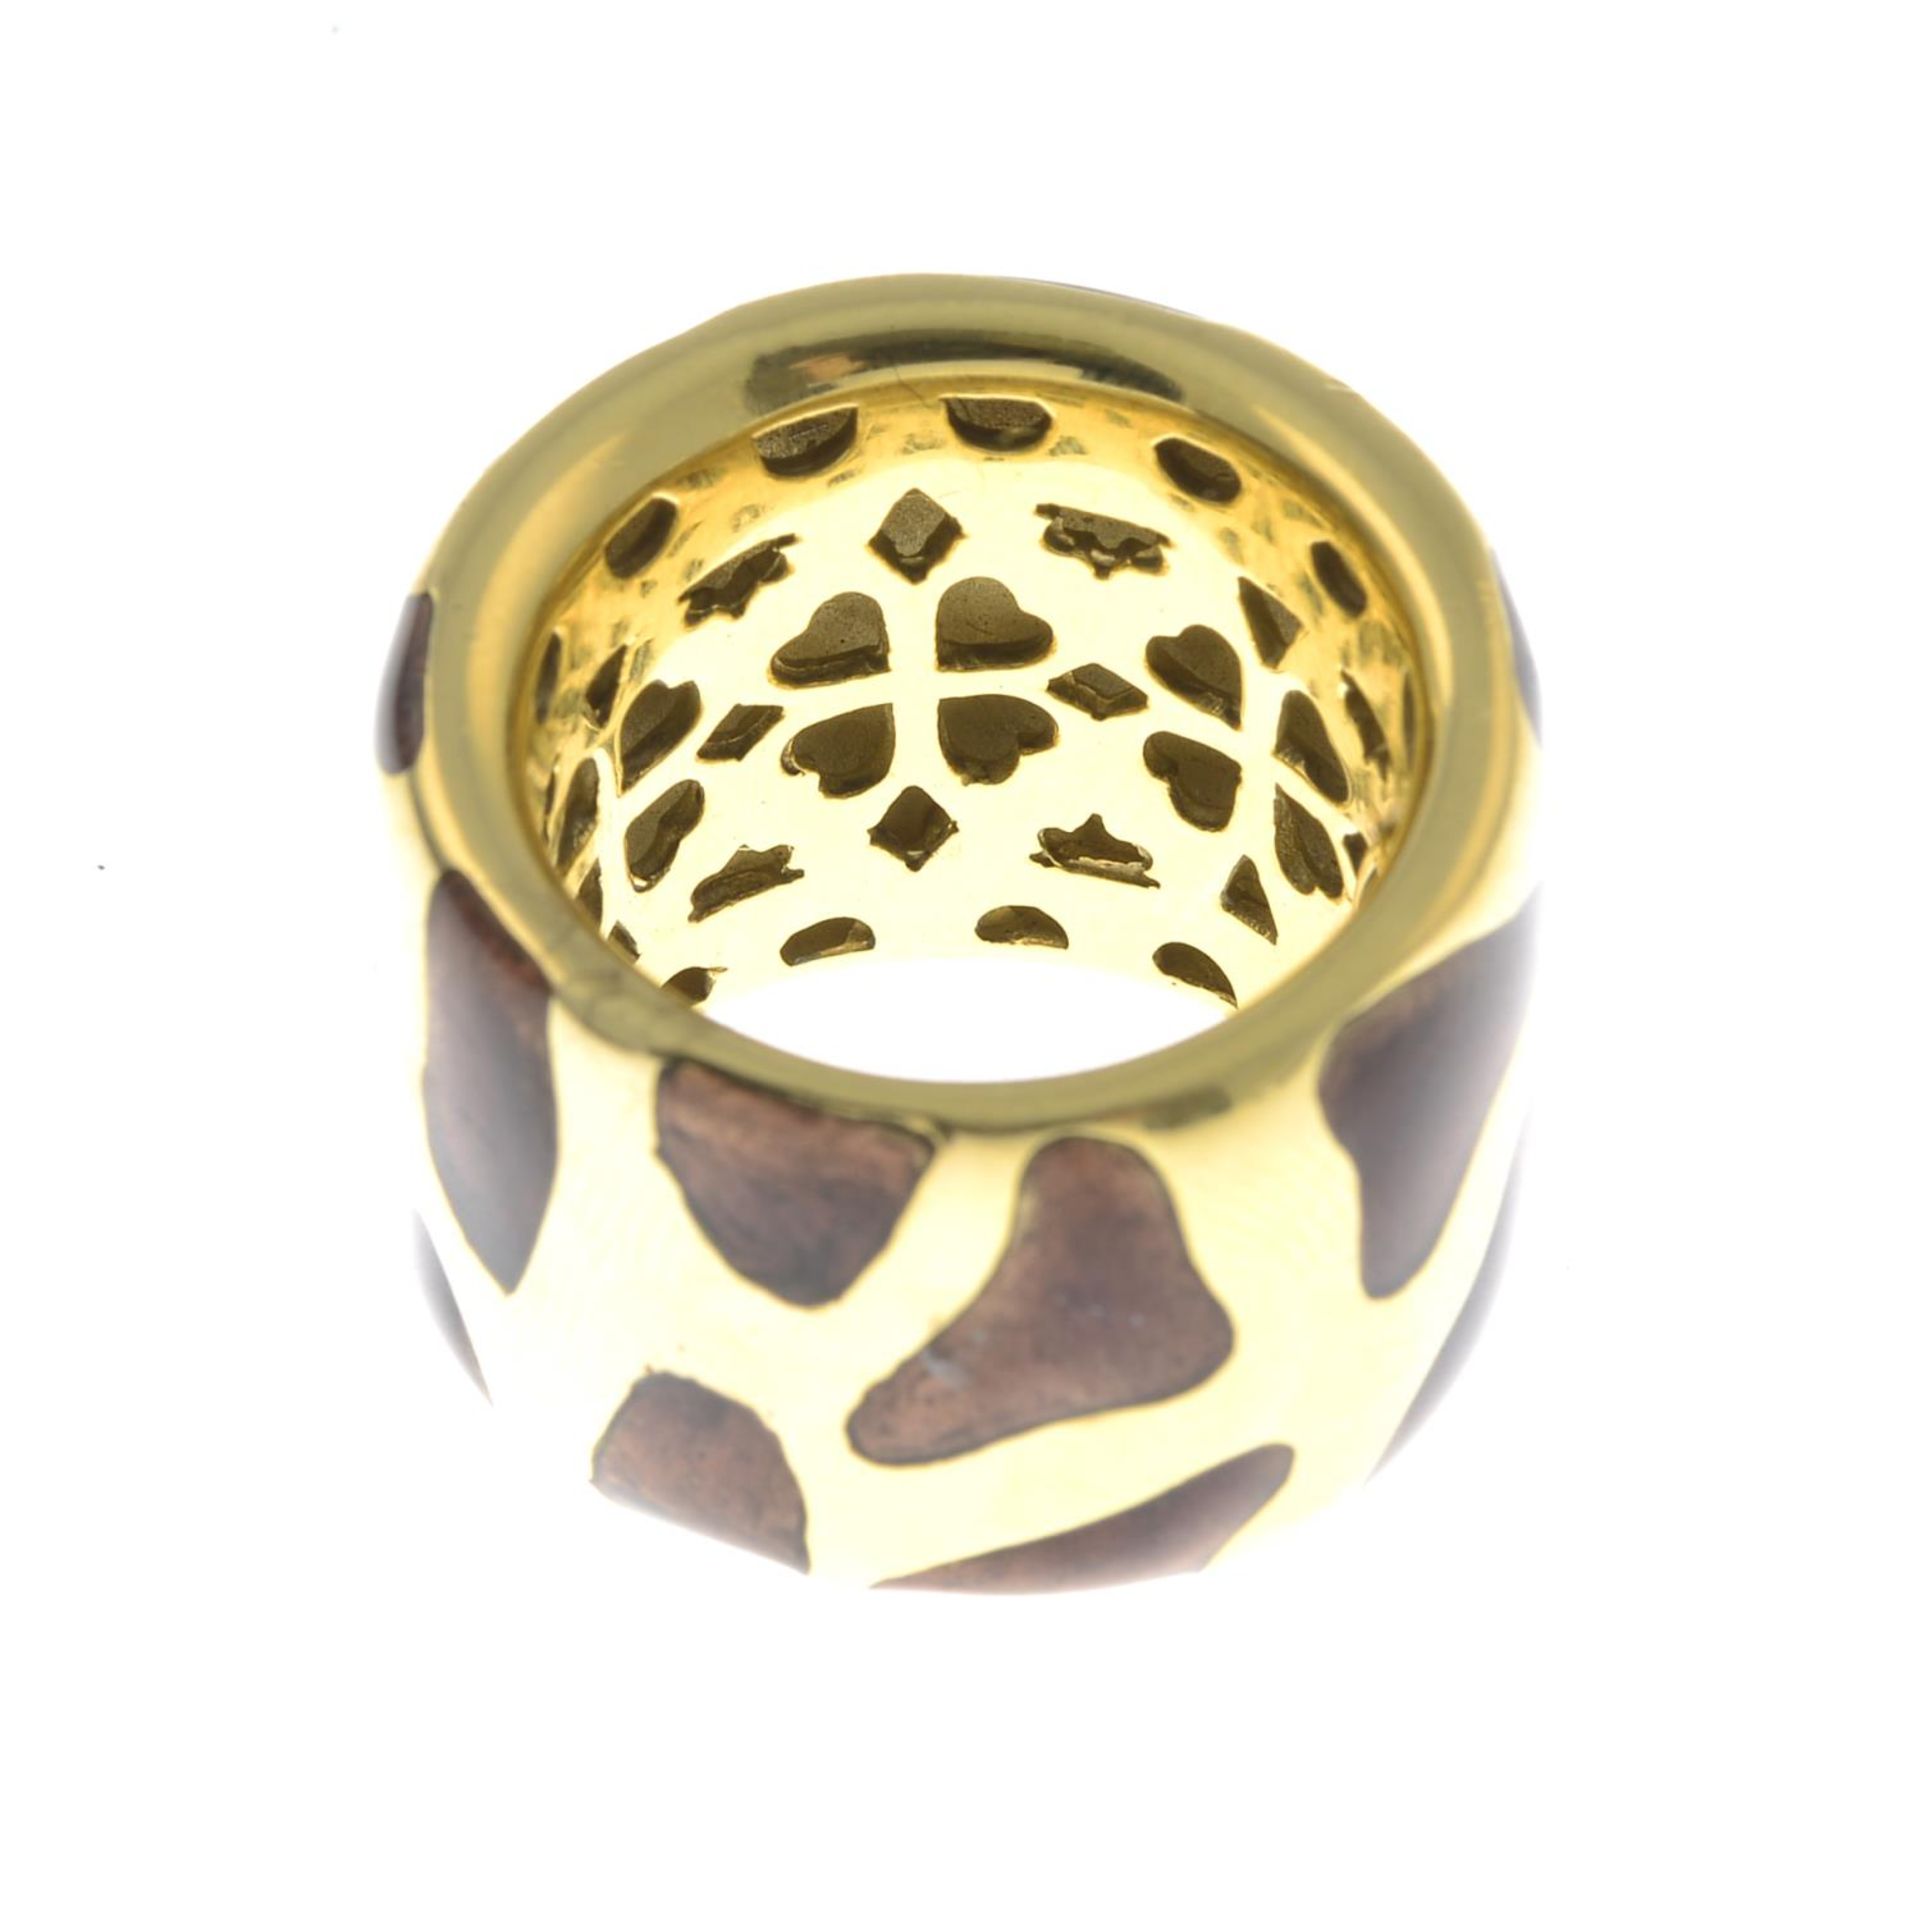 An 18ct gold brown enamel 'Giraffe' ring, by Roberto Coin.Hallmarks for Birmingham. - Image 5 of 5